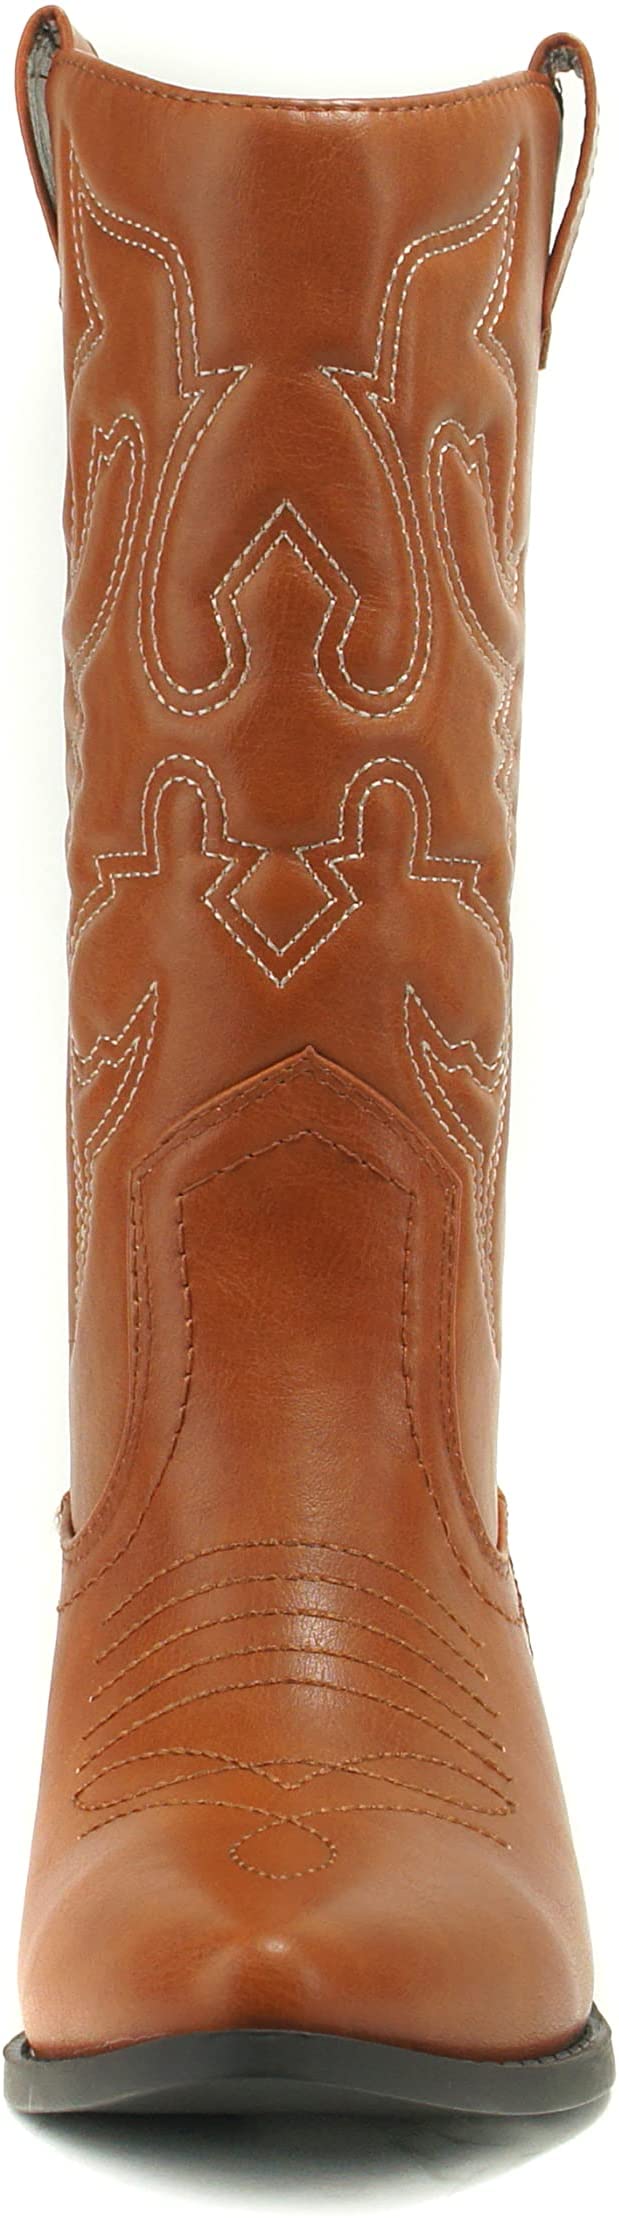 Soda Women Cowgirl Cowboy Western Stitched Boots Pointy Toe Knee High Reno-S Cognac Tan Light Brown 7.5 - image 3 of 4